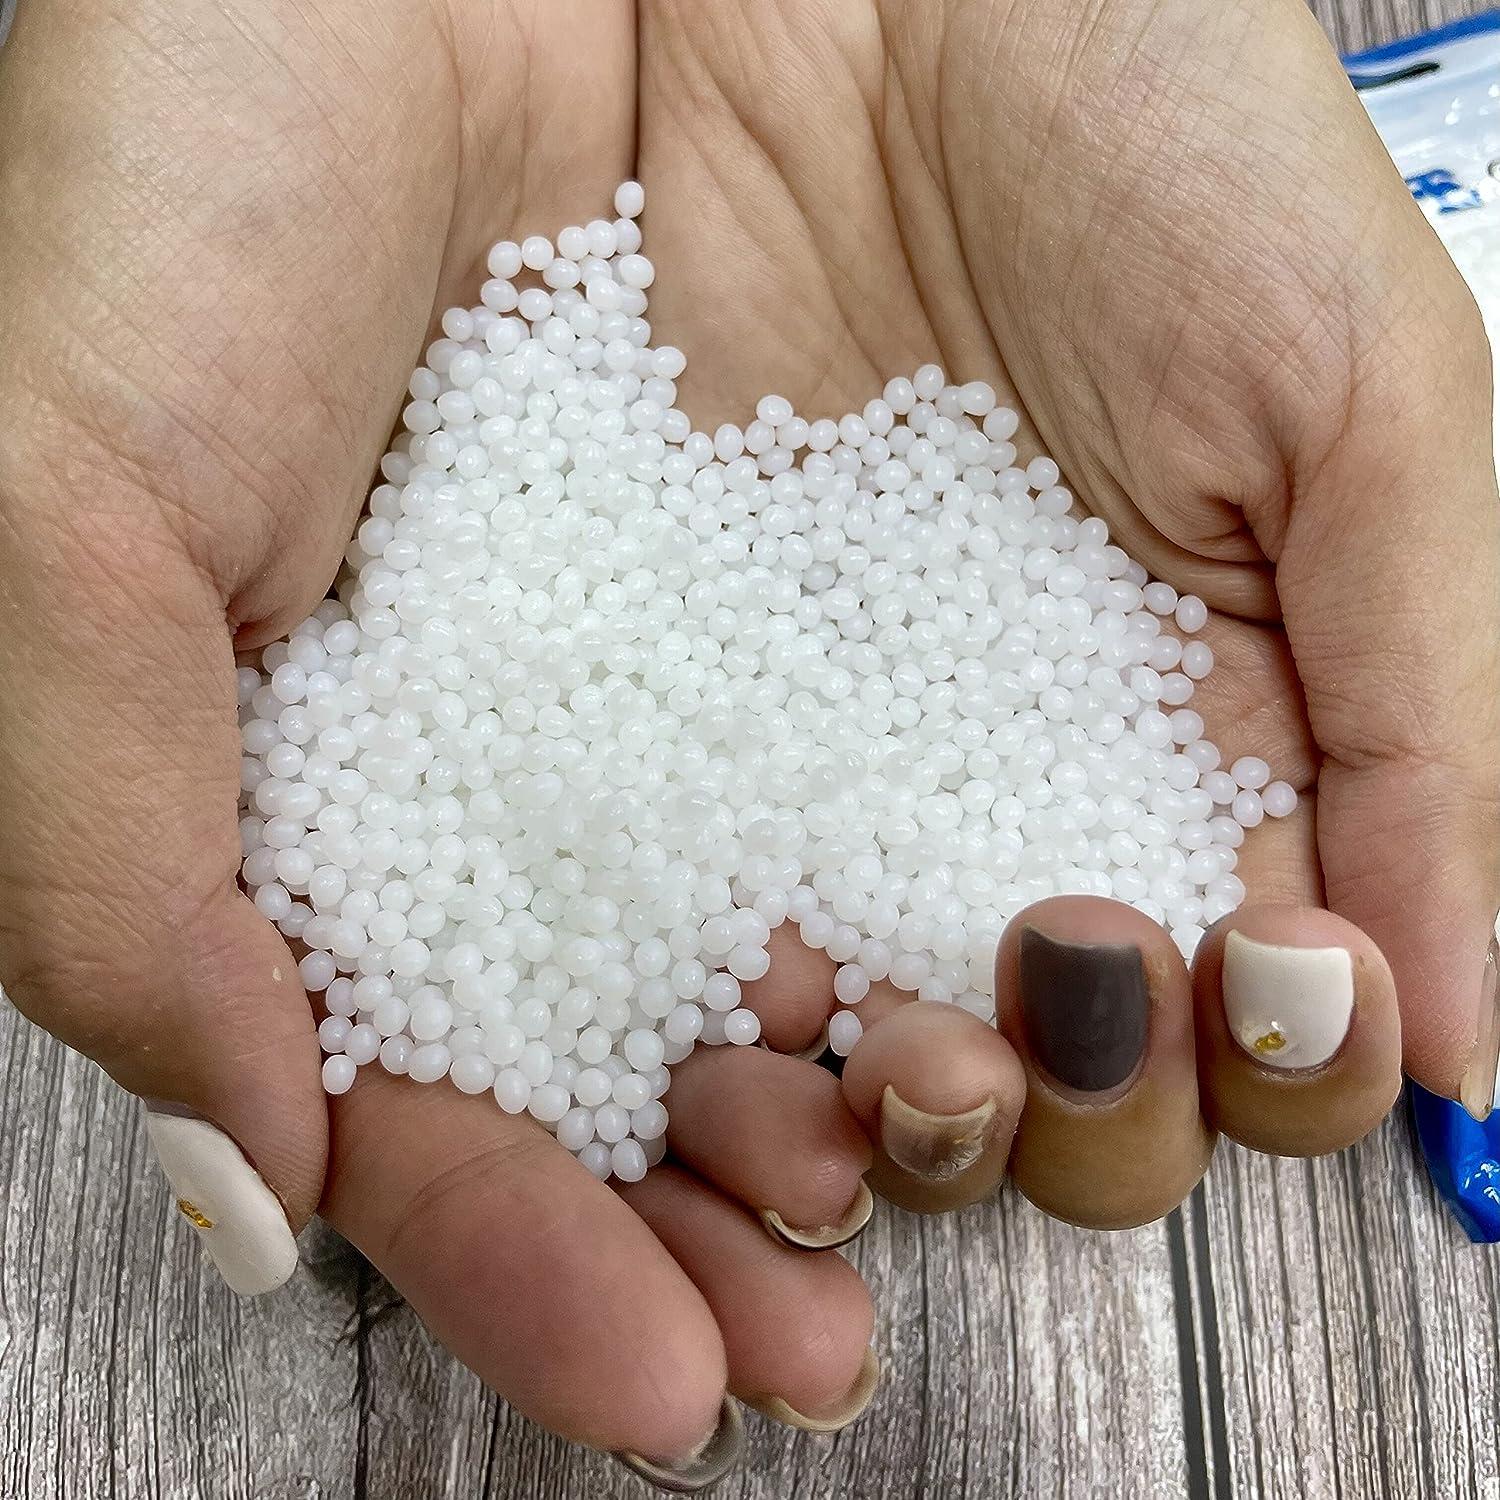 White Thermoplastic Beads, Plastic Pellets for Crafts, Cosplay